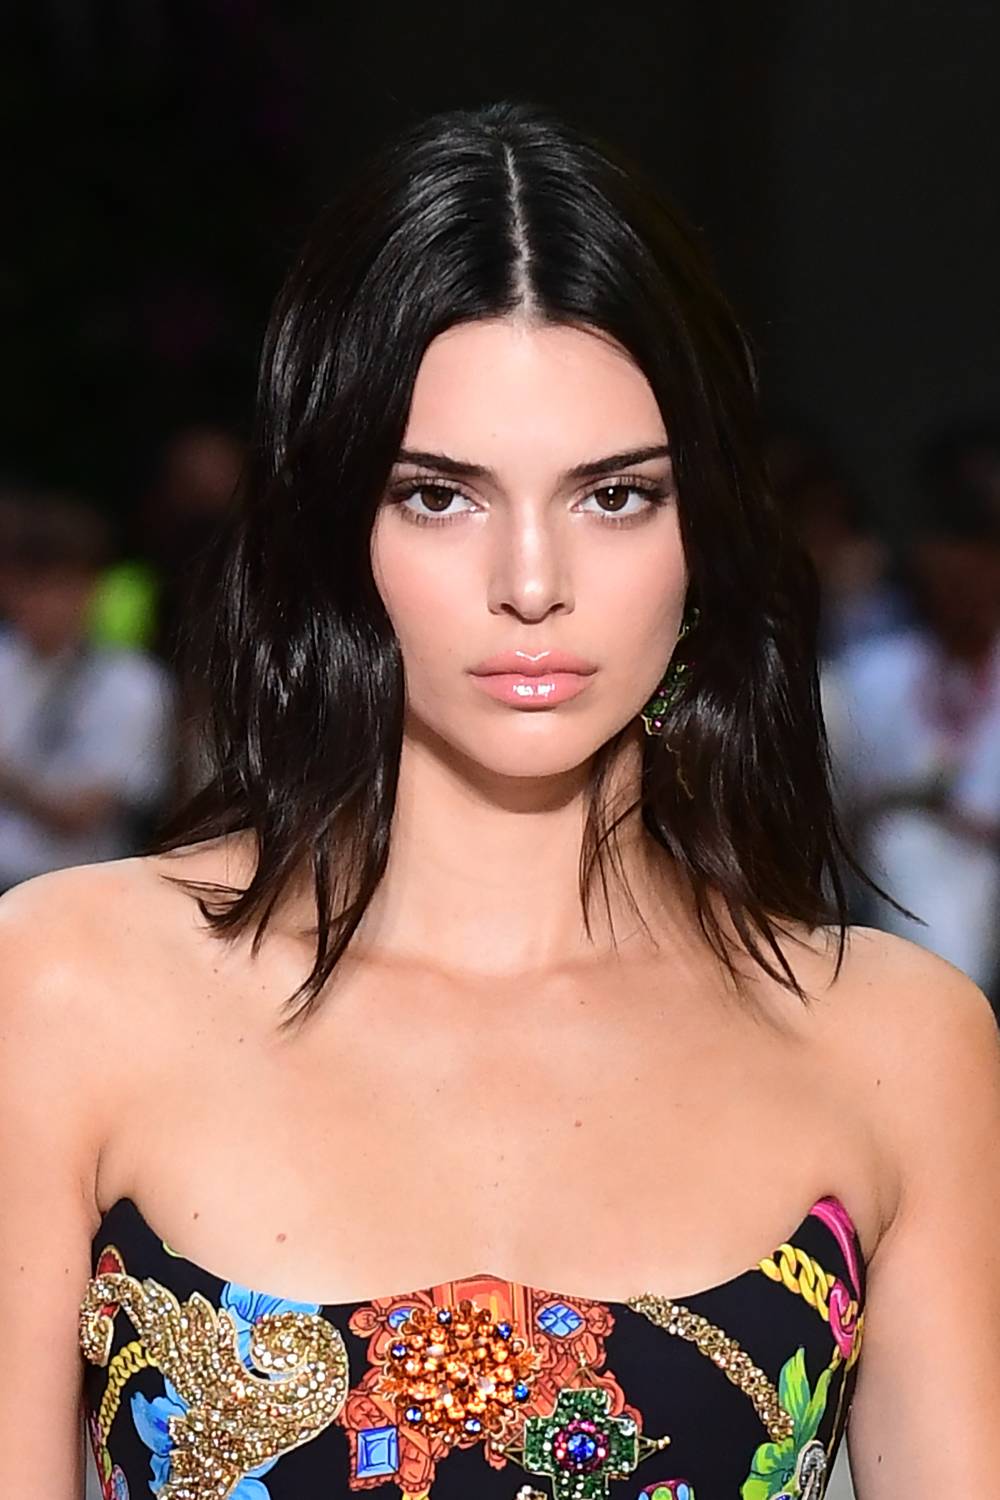 US model Kendall Jenner presents a creation by Versace during the men & women's spring/summer 2019 collection fashion show in Milan, on June 16, 2018. (Photo by MIGUEL MEDINA / AFP) (Photo credit should read MIGUEL MEDINA/AFP/Getty Images)